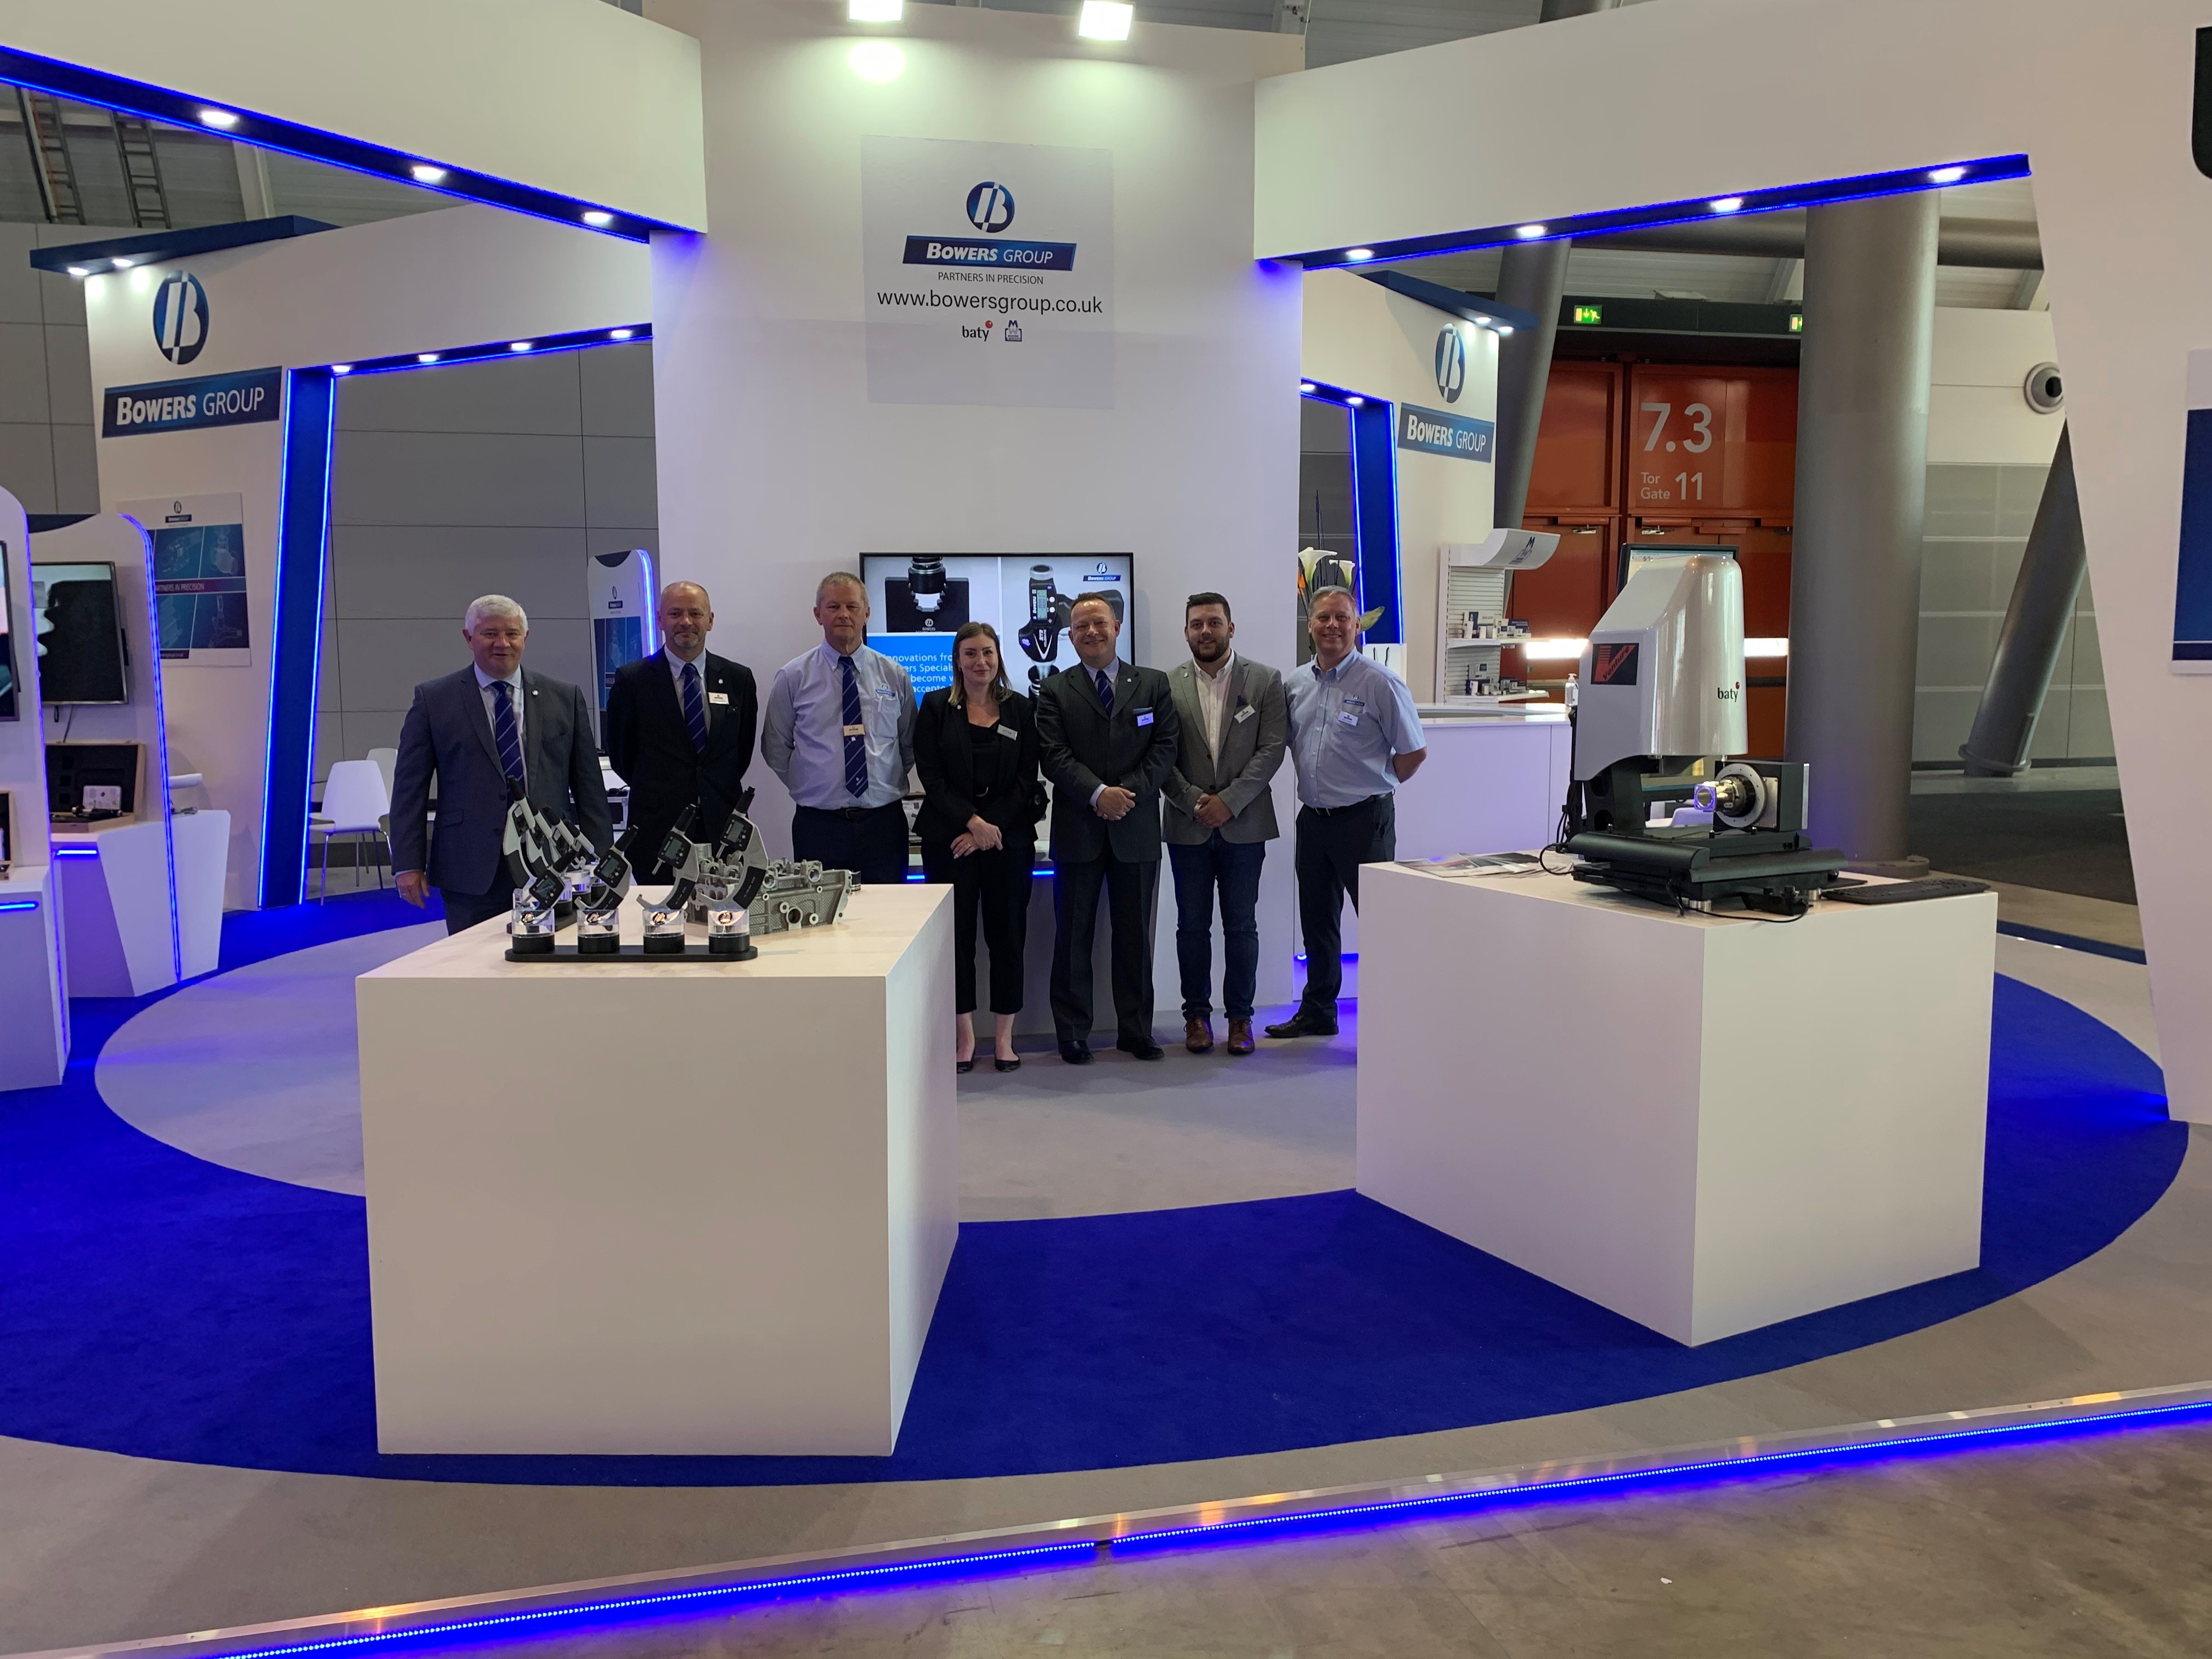 Successful Control Exhibition for Bowers Group after 3 Year Hiatus